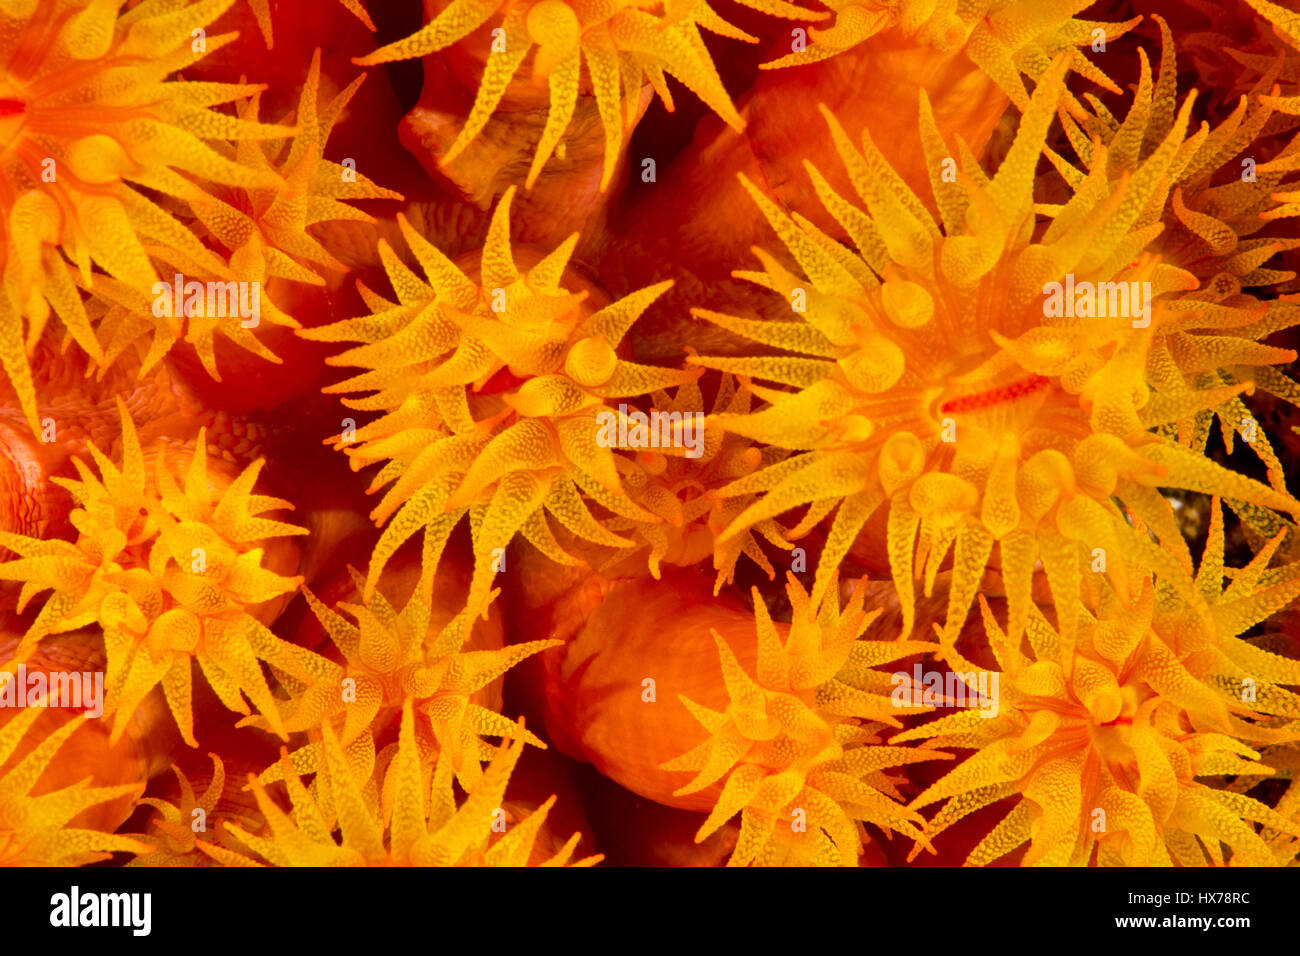 A close-up view of cup coral with its tentacles out, feeding at night. Stock Photo